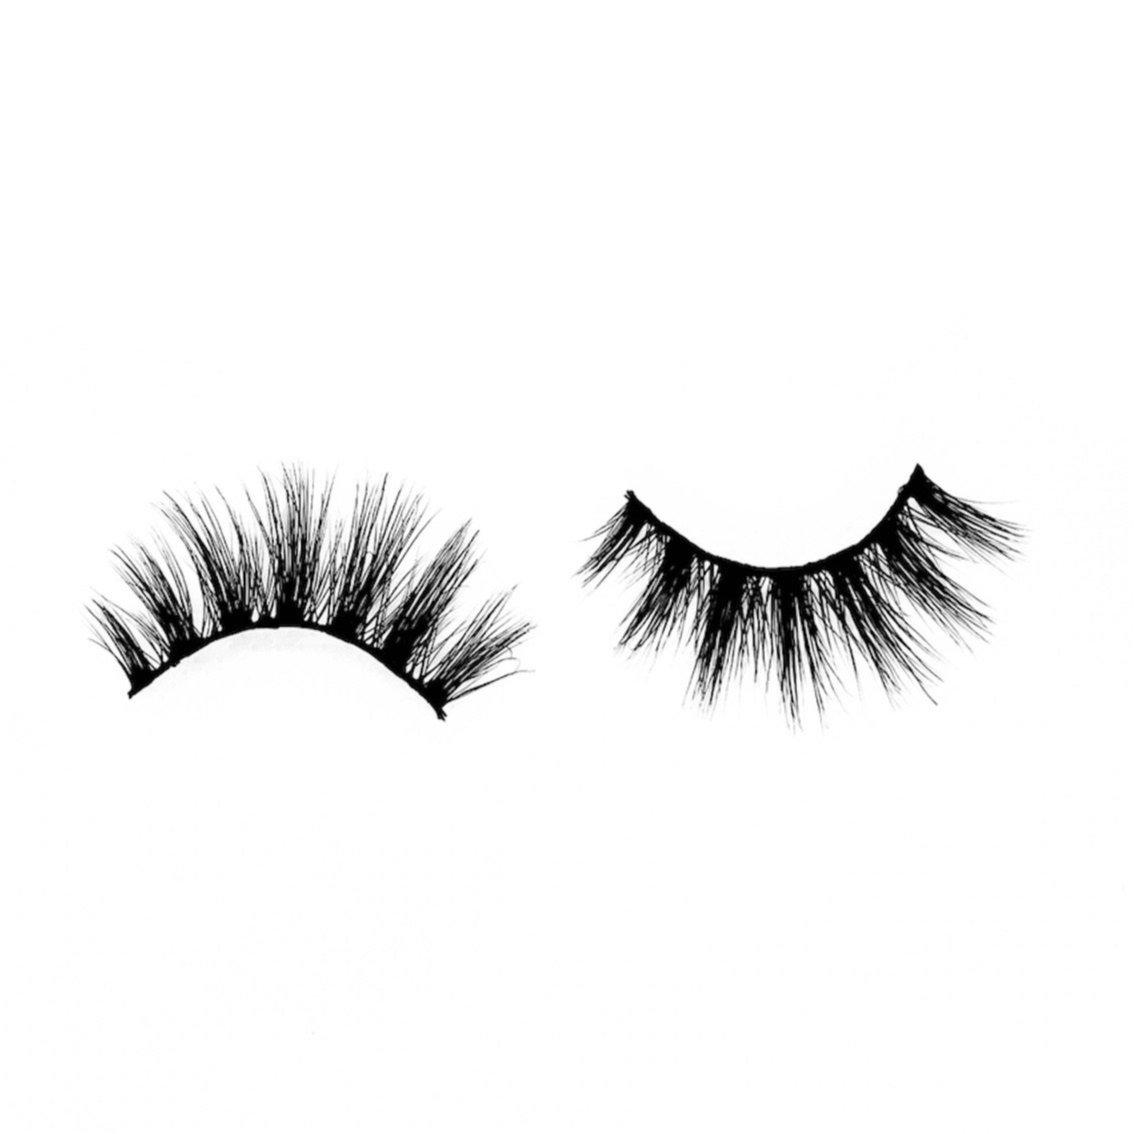 Sassy-Medium Volume-Our “Sassy” lashes are an entire vibe. They’re versatile and have that gorgeous wispy look that everyone loves. "Sassy” is a natural, flirty, medium volume lash that’s designed to enhance and brighten your eyes with longer lengths towards the middle. These are a MUST HAVE for your go-to collection. Description Handmade, Cruelty-Free, Wear up to 30x Material: 100% Mink Band: Black Cotton Band Volume: Medium Style: Wispy, Open-eye, Flirty, Natural To Use: Measure and size your 